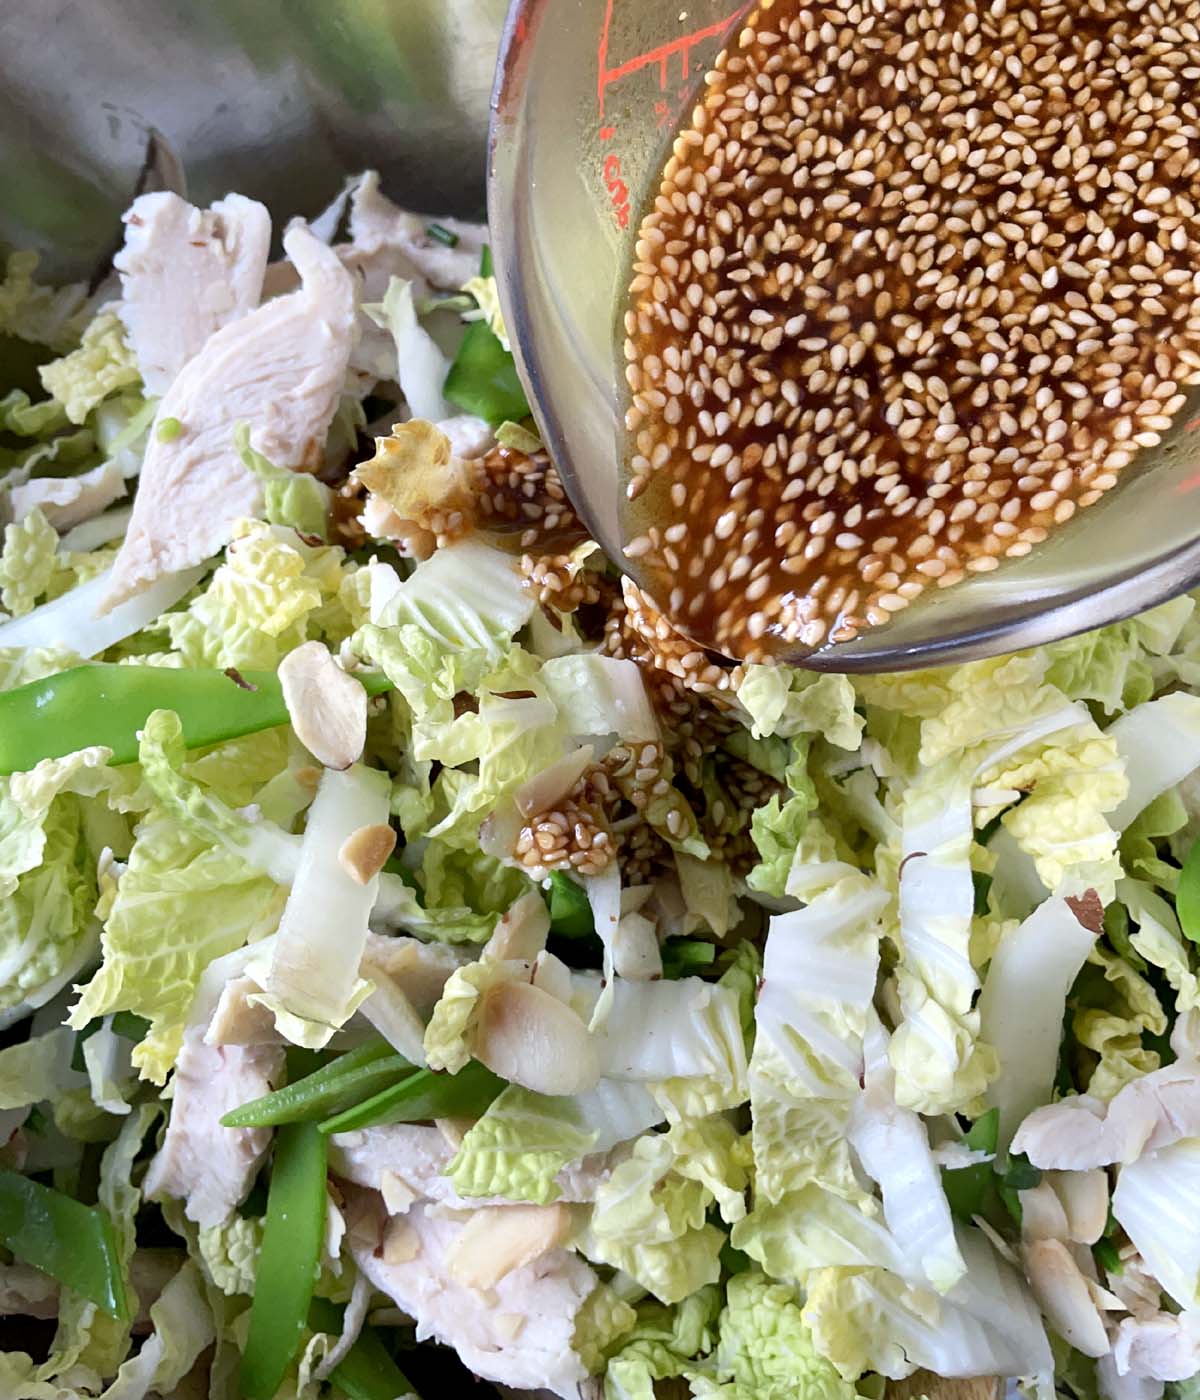 Sesame seed brown dressing being poured into a bowl containing cabbage, sliced almonds, snow peas.